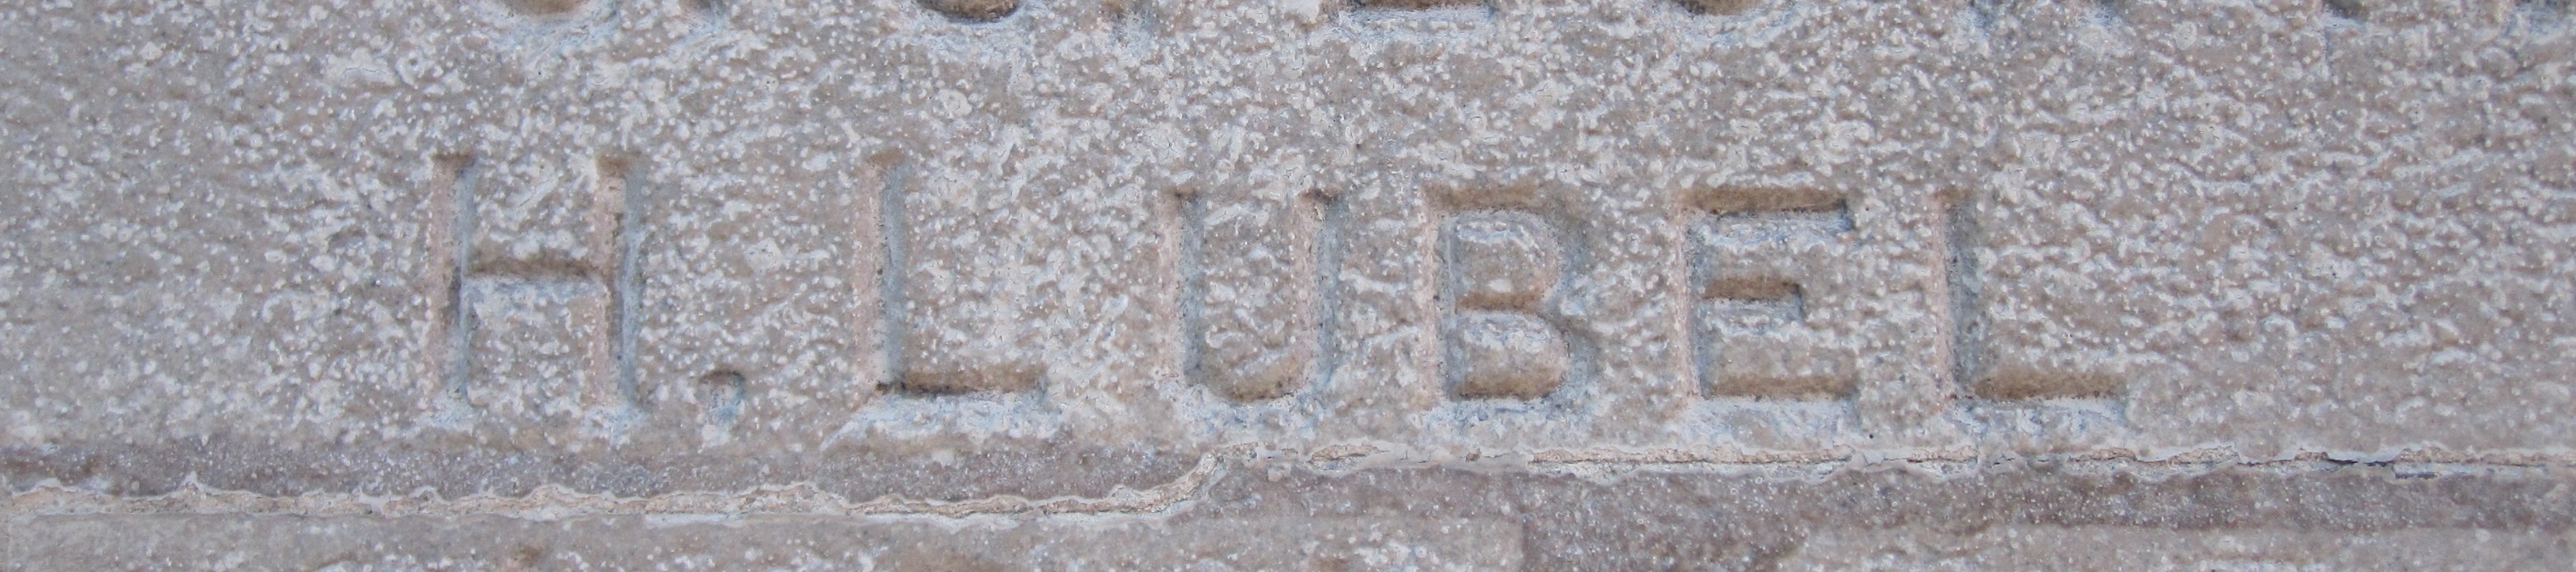 Hyman Lubel's name engraved on the Stockwell War Memorial